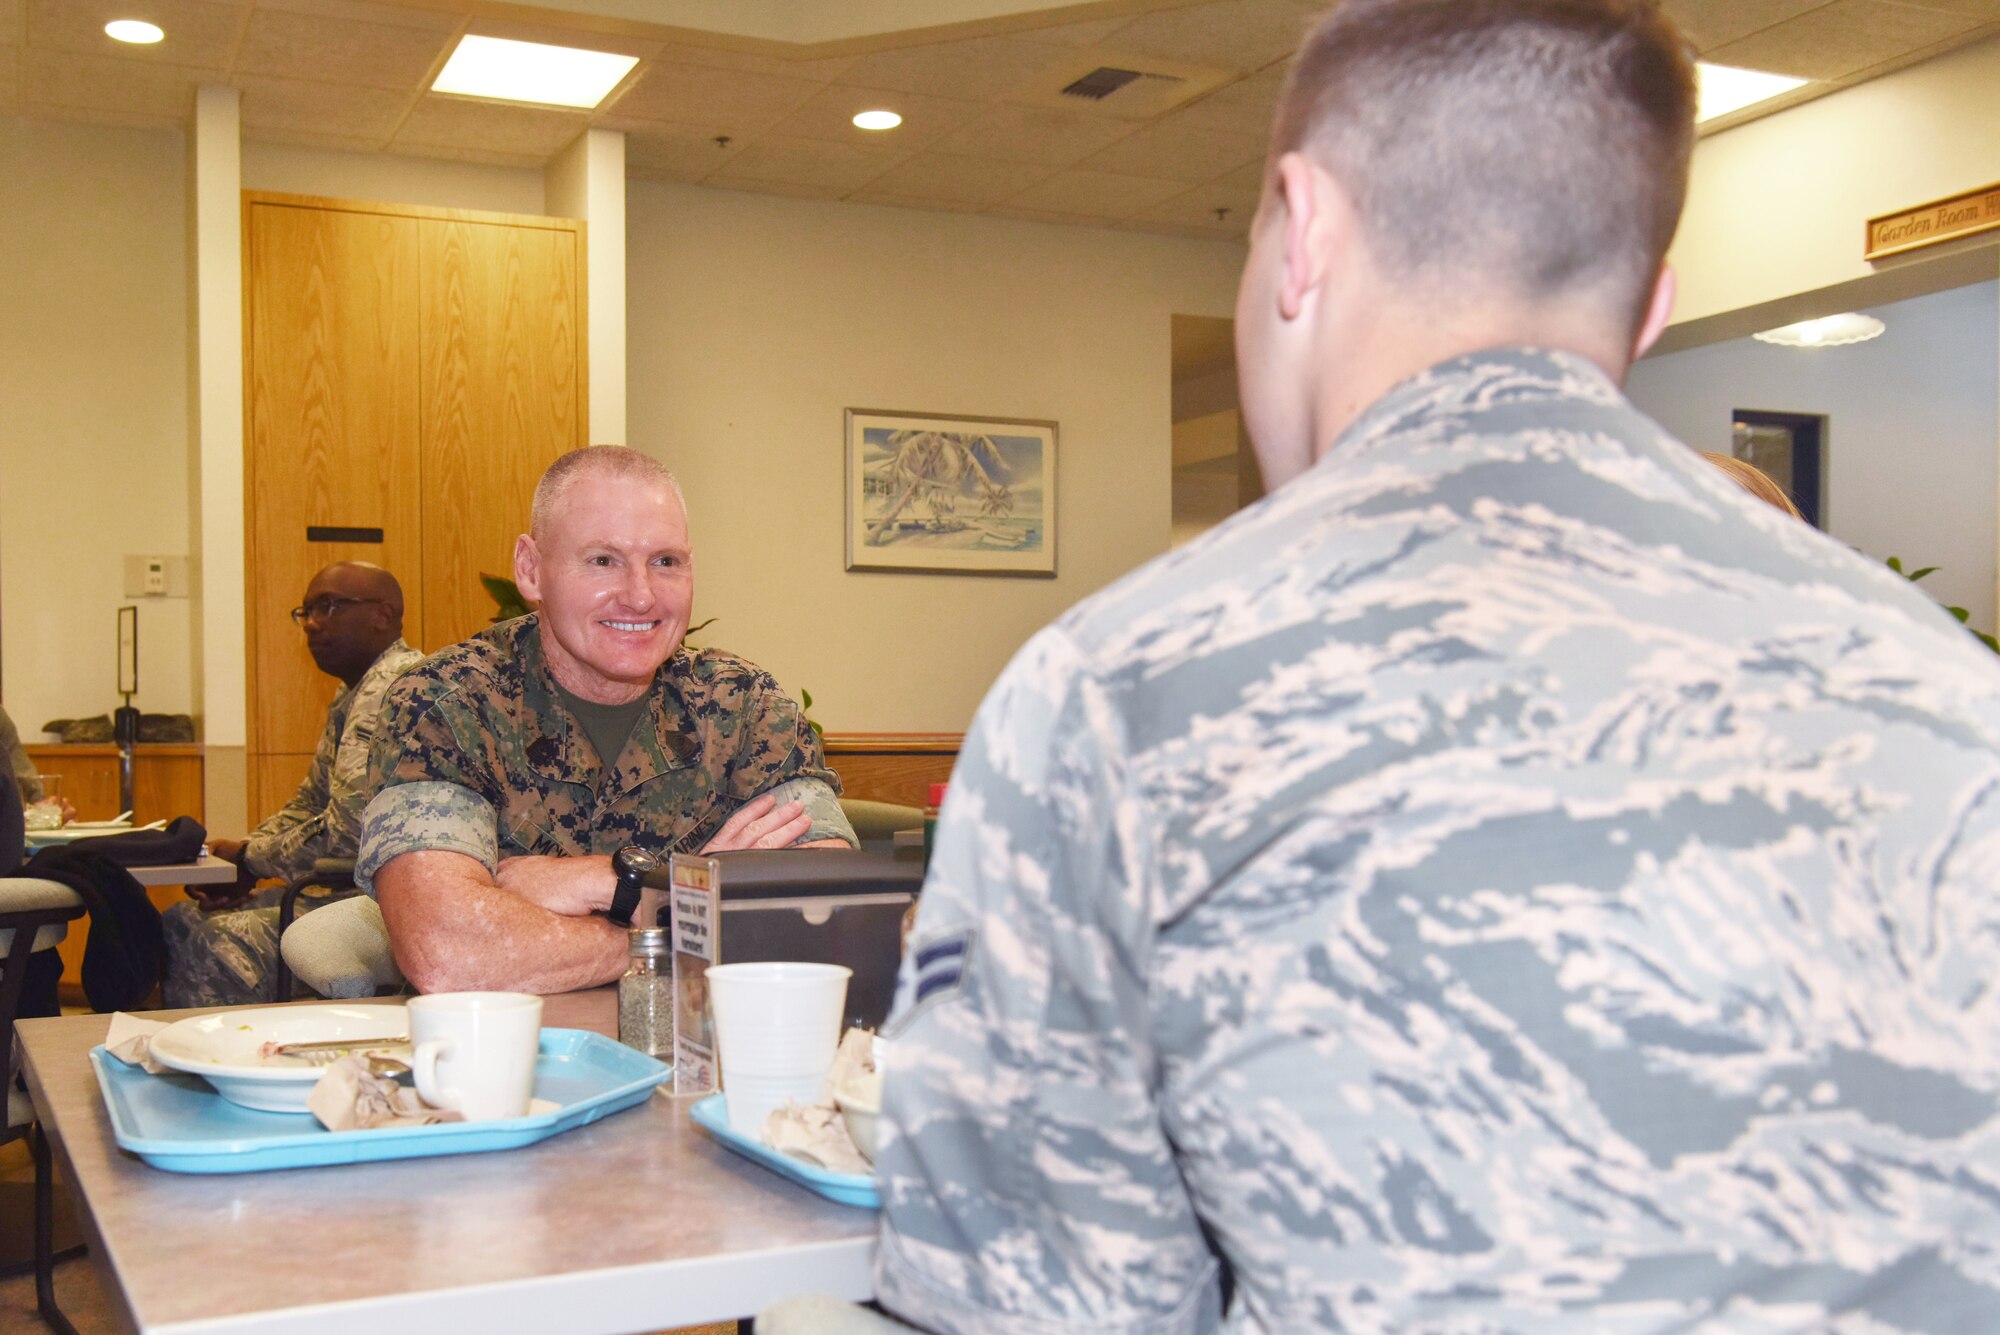 U.S. Marine Corps Command Sgt. Maj. Paul McKenna, U.S. Northern Command and North American Aerospace Defense Command senior enlisted leader, has breakfast with Vandenberg Airmen on Aug. 8, 2018 at Vandenberg Air Force Base, Calif. (U.S. Air Force photo by Airman 1st Class Aubree Milks/Released)